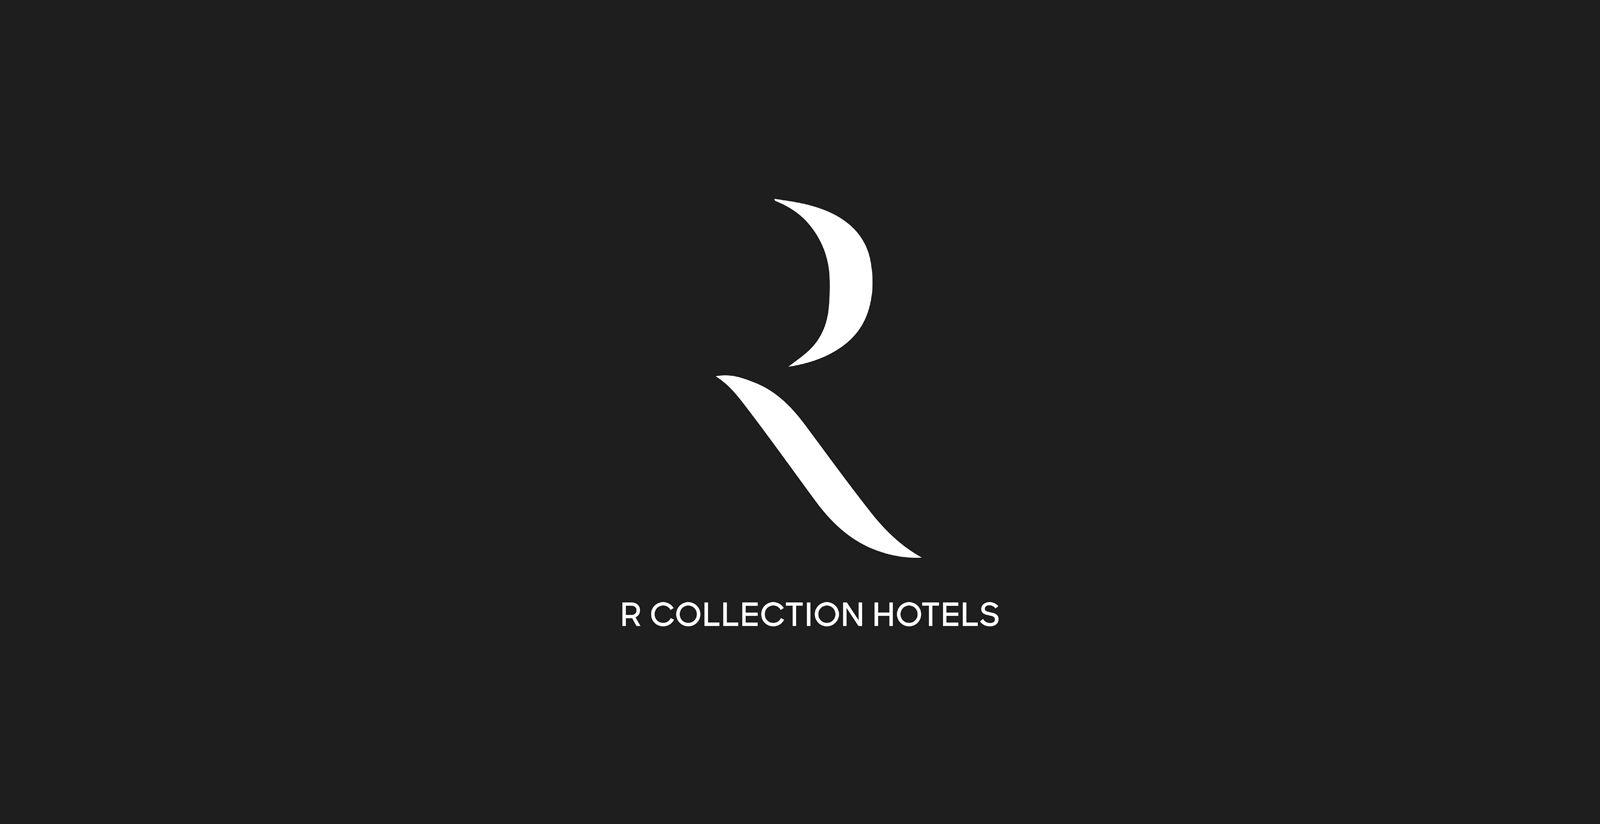 R Collection Hotels - Company data 2